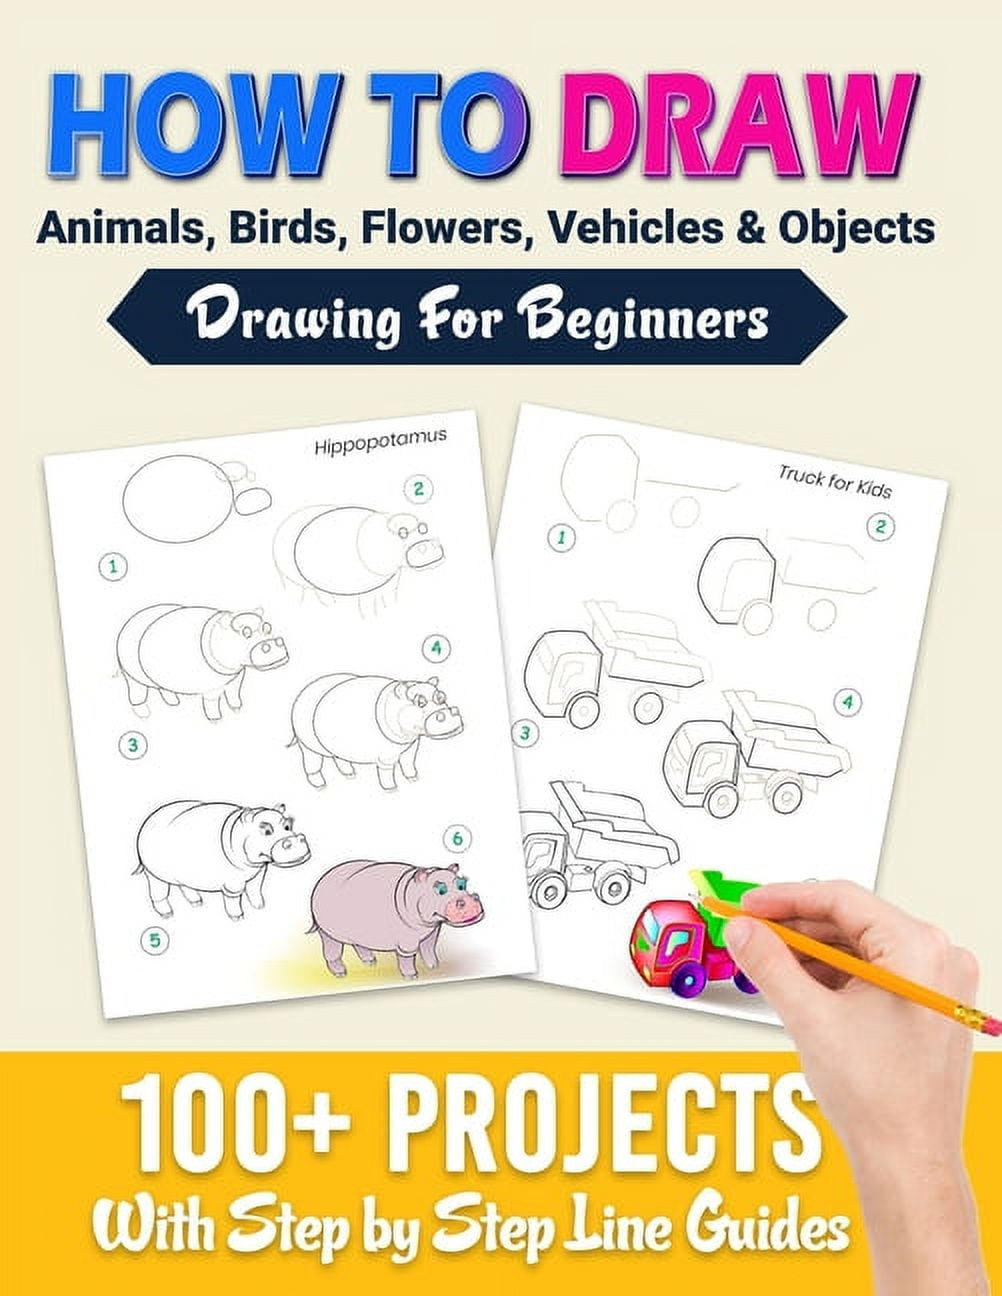 How To Draw 202 Things Easy step-by-step Drawing for Kids: Simple And Easy  Drawing Book for kids 6-8, 9-12. With Animals, Plants, Sports, Foods.   to Sketch, XXL How To Draw Book